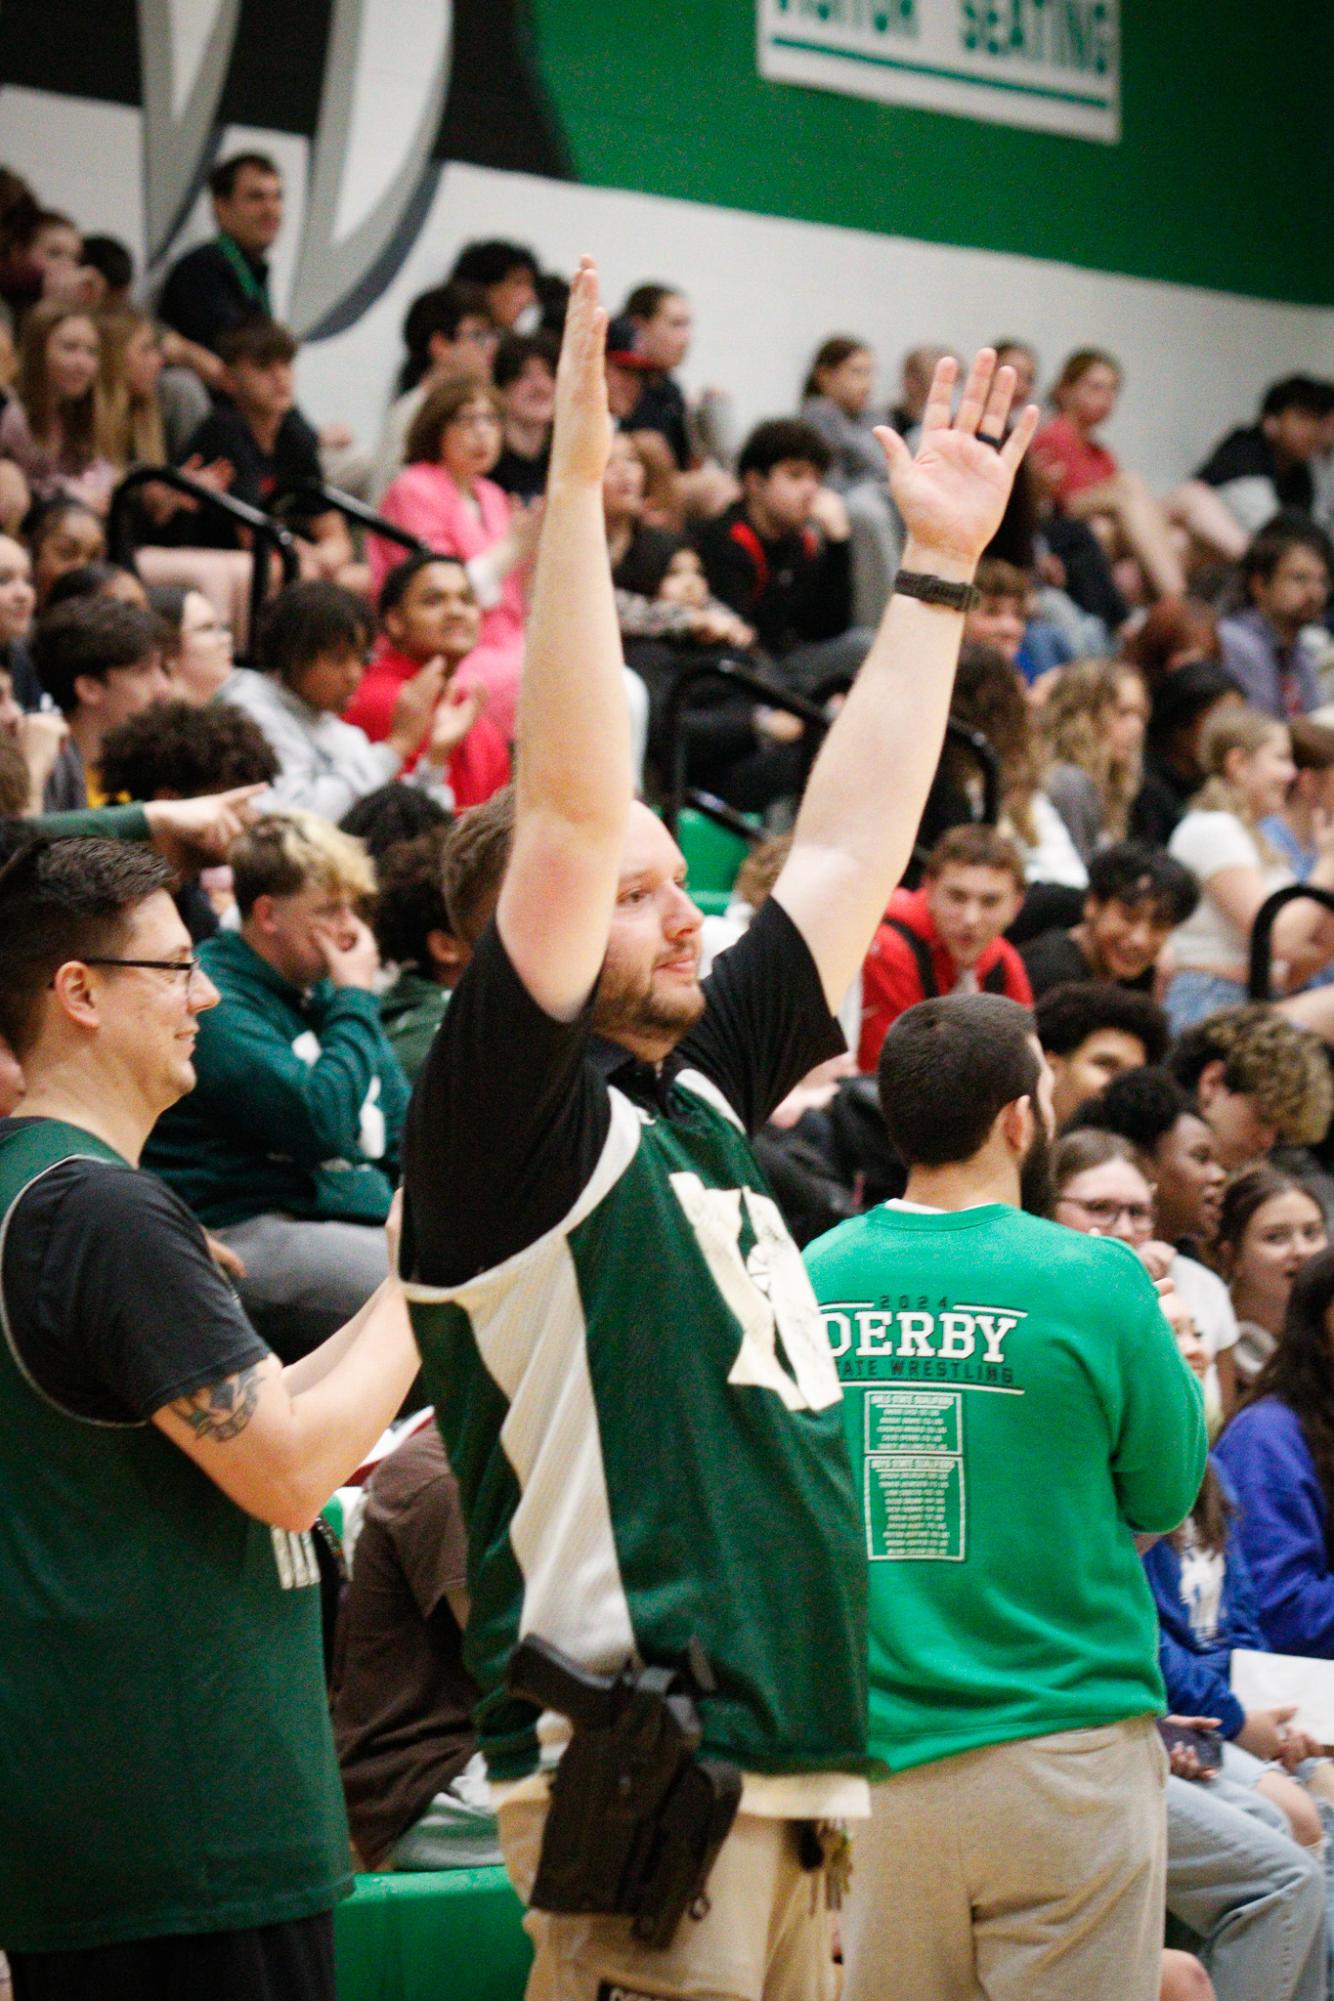 Senior+vs.+Staff+basketball+game+%28Photos+by+Laurisa+Rooney%29